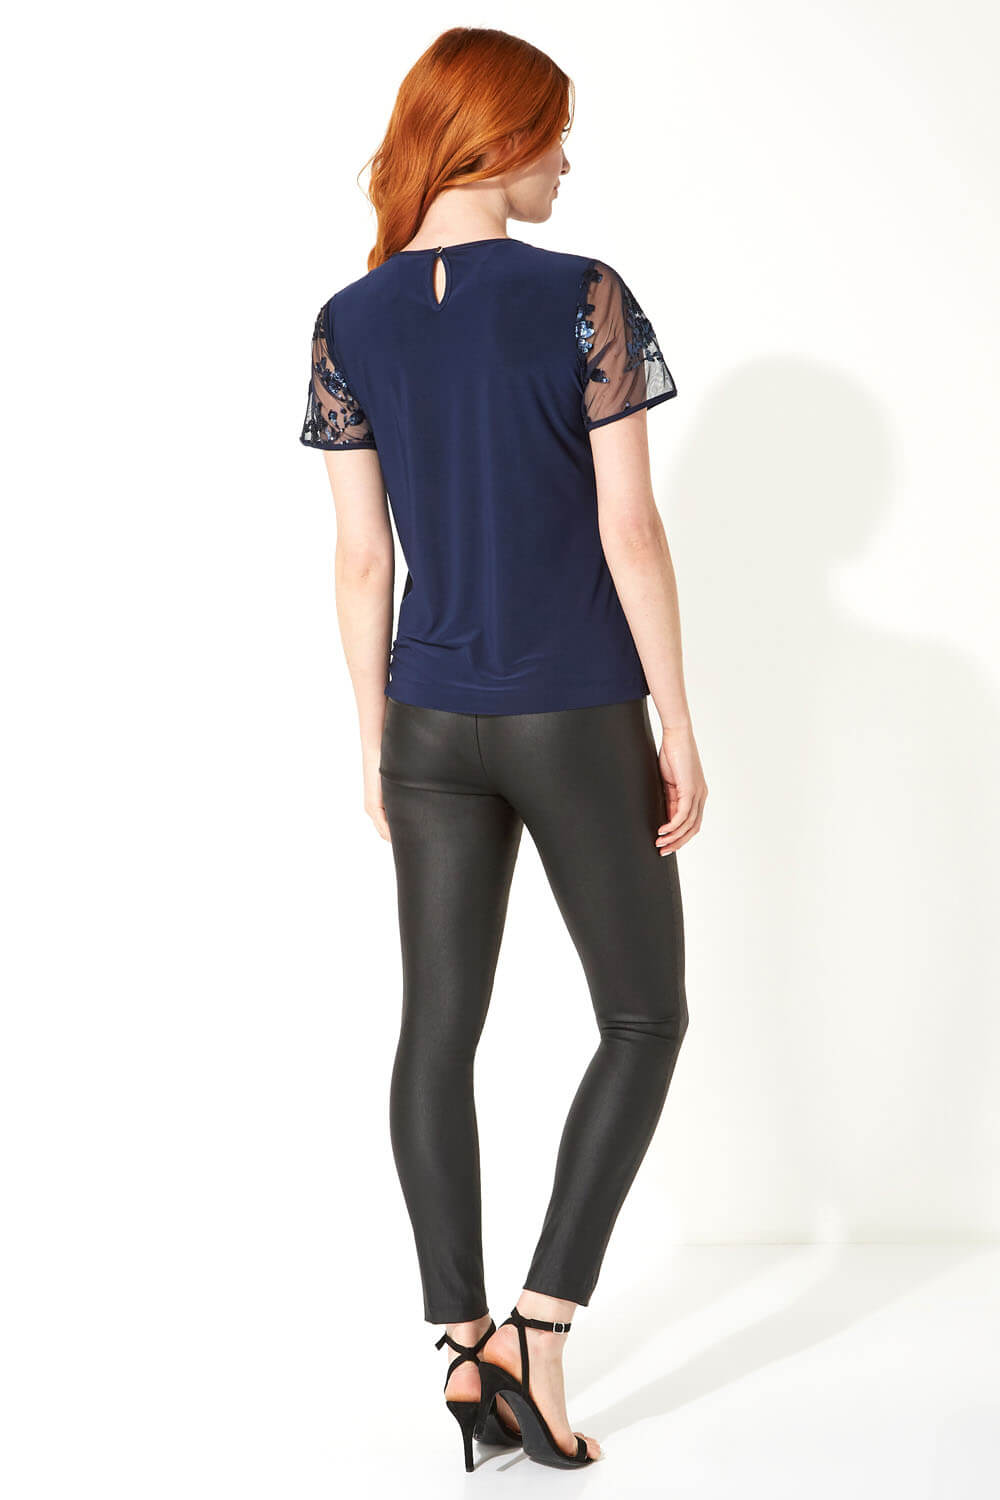 Navy  Floral Mesh Embroidered Top, Image 3 of 5